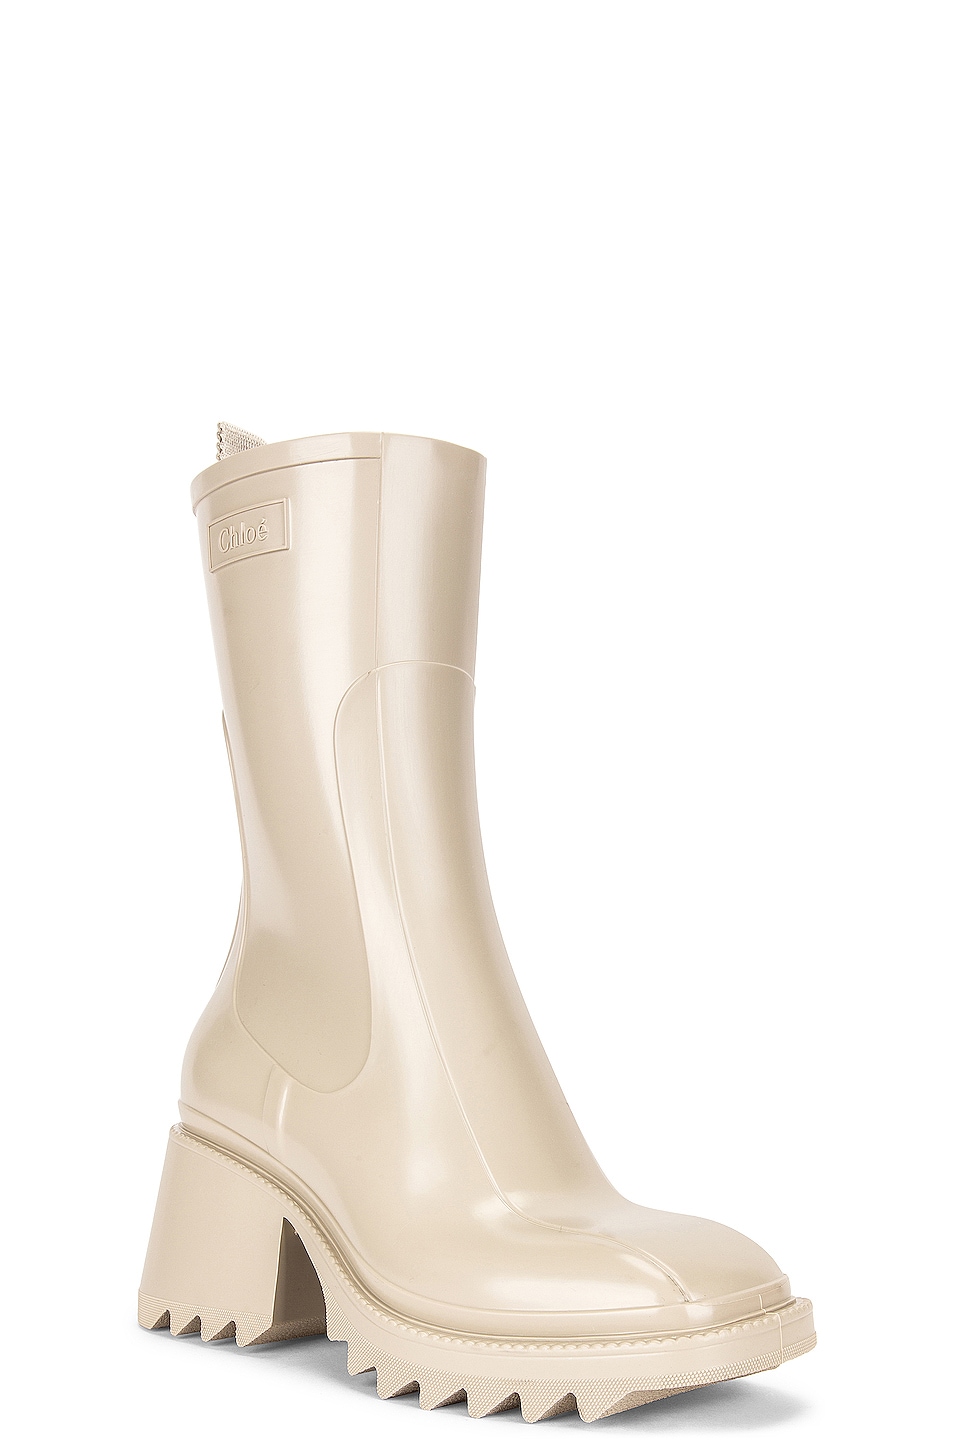 Chloe Betty Boots in Nomad Beige | FWRD